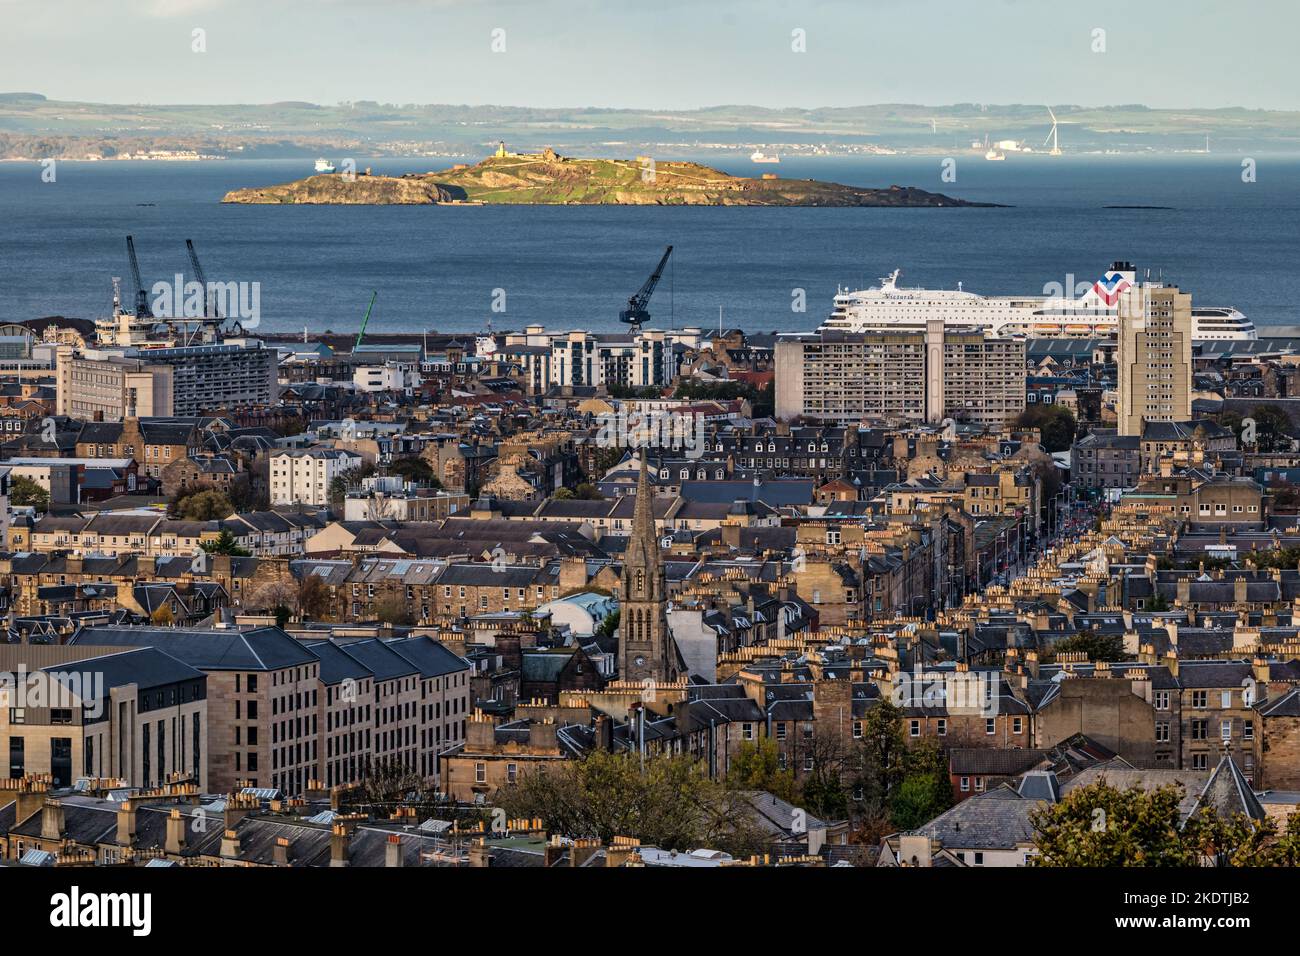 View over rooftops to Leith, Walk Inchkeith island in Firth of Forth & MS Victoria ship, Edinburgh, Scotland, UK Stock Photo